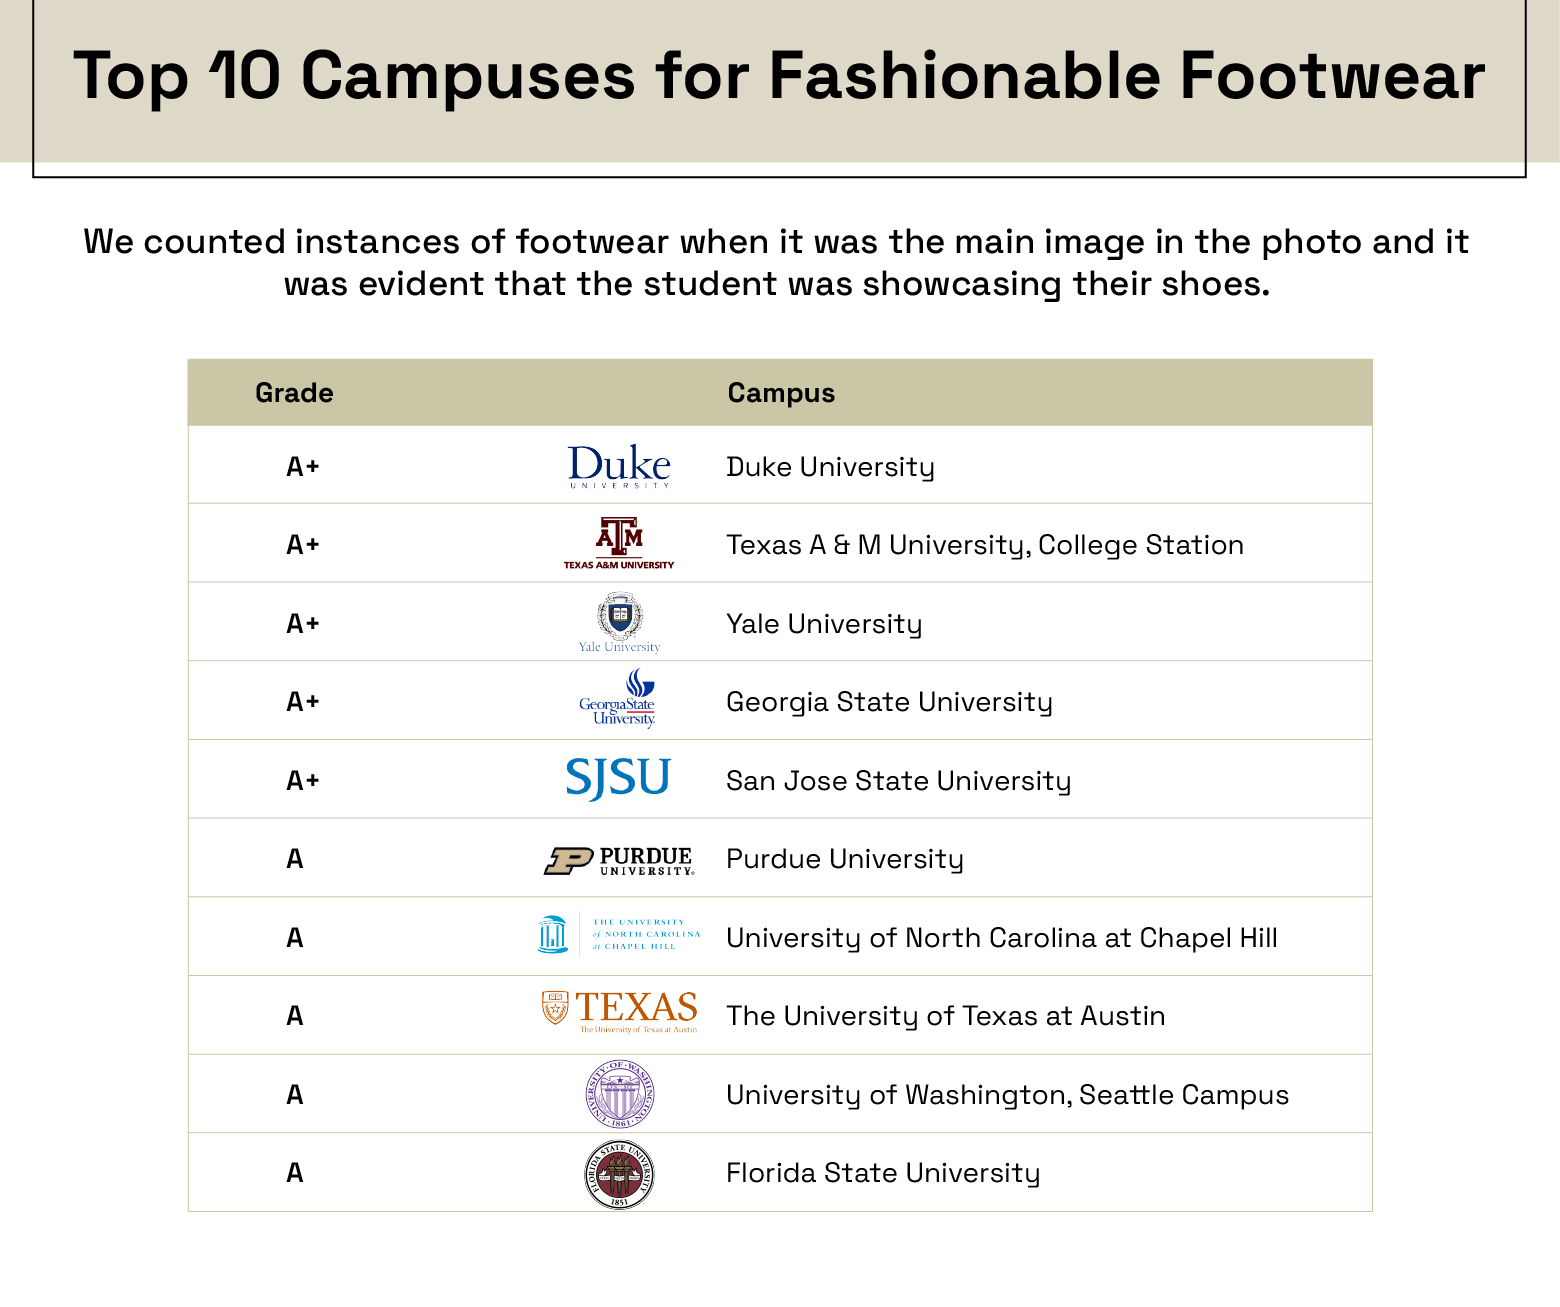 A ranking of the schools with the best footwear
